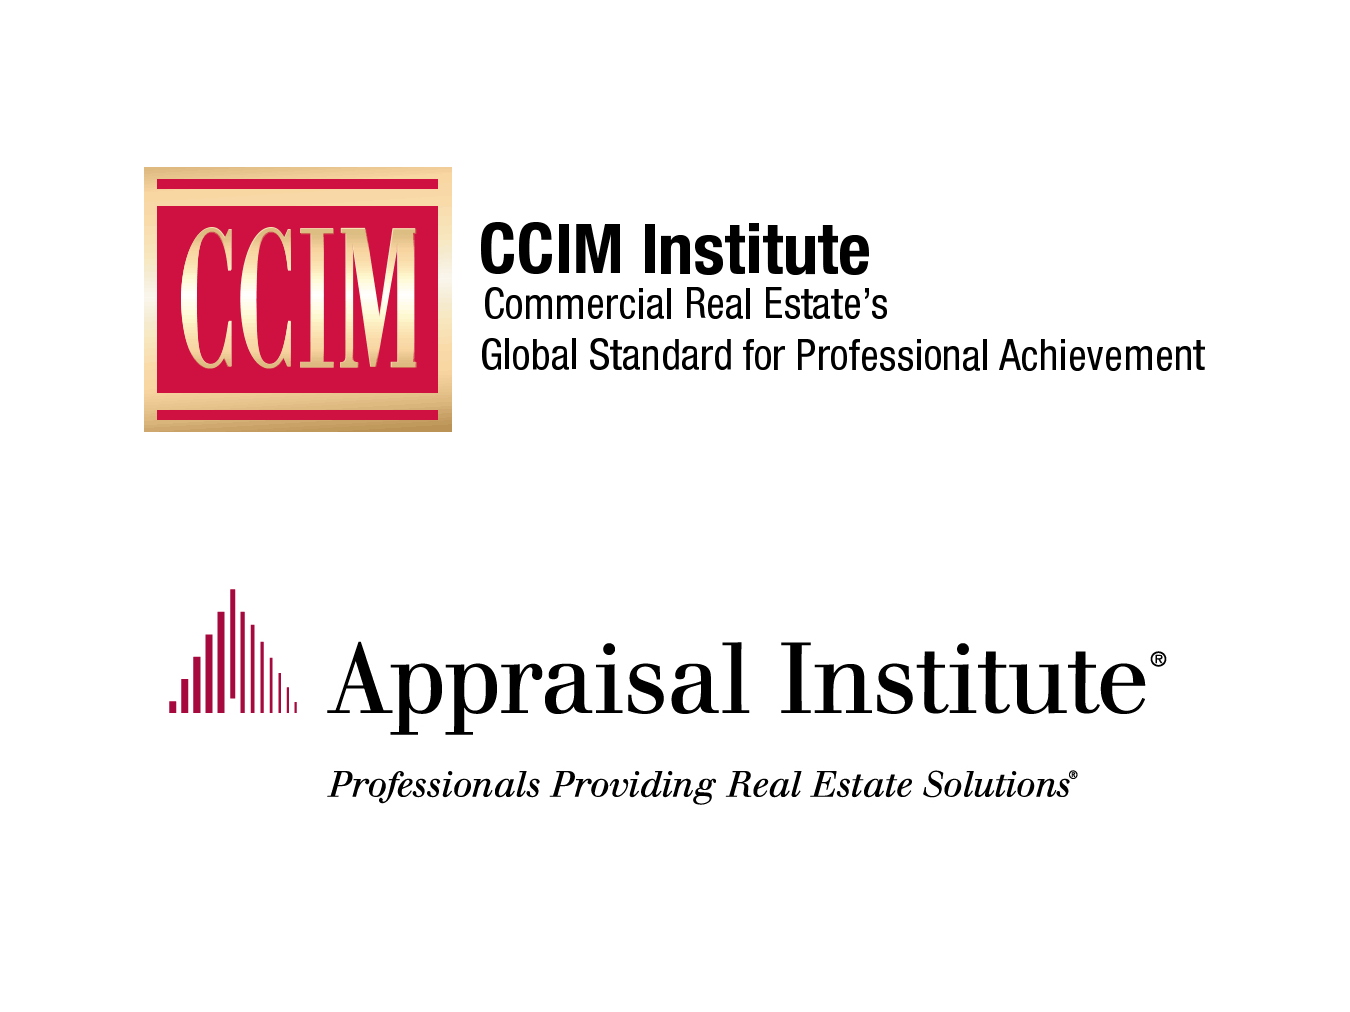 CCIM Institute, Commercial Real Estate's Global Standard for Professional Advancement. Appraisal Institute, Professionals Providing Real Estate Solutions.